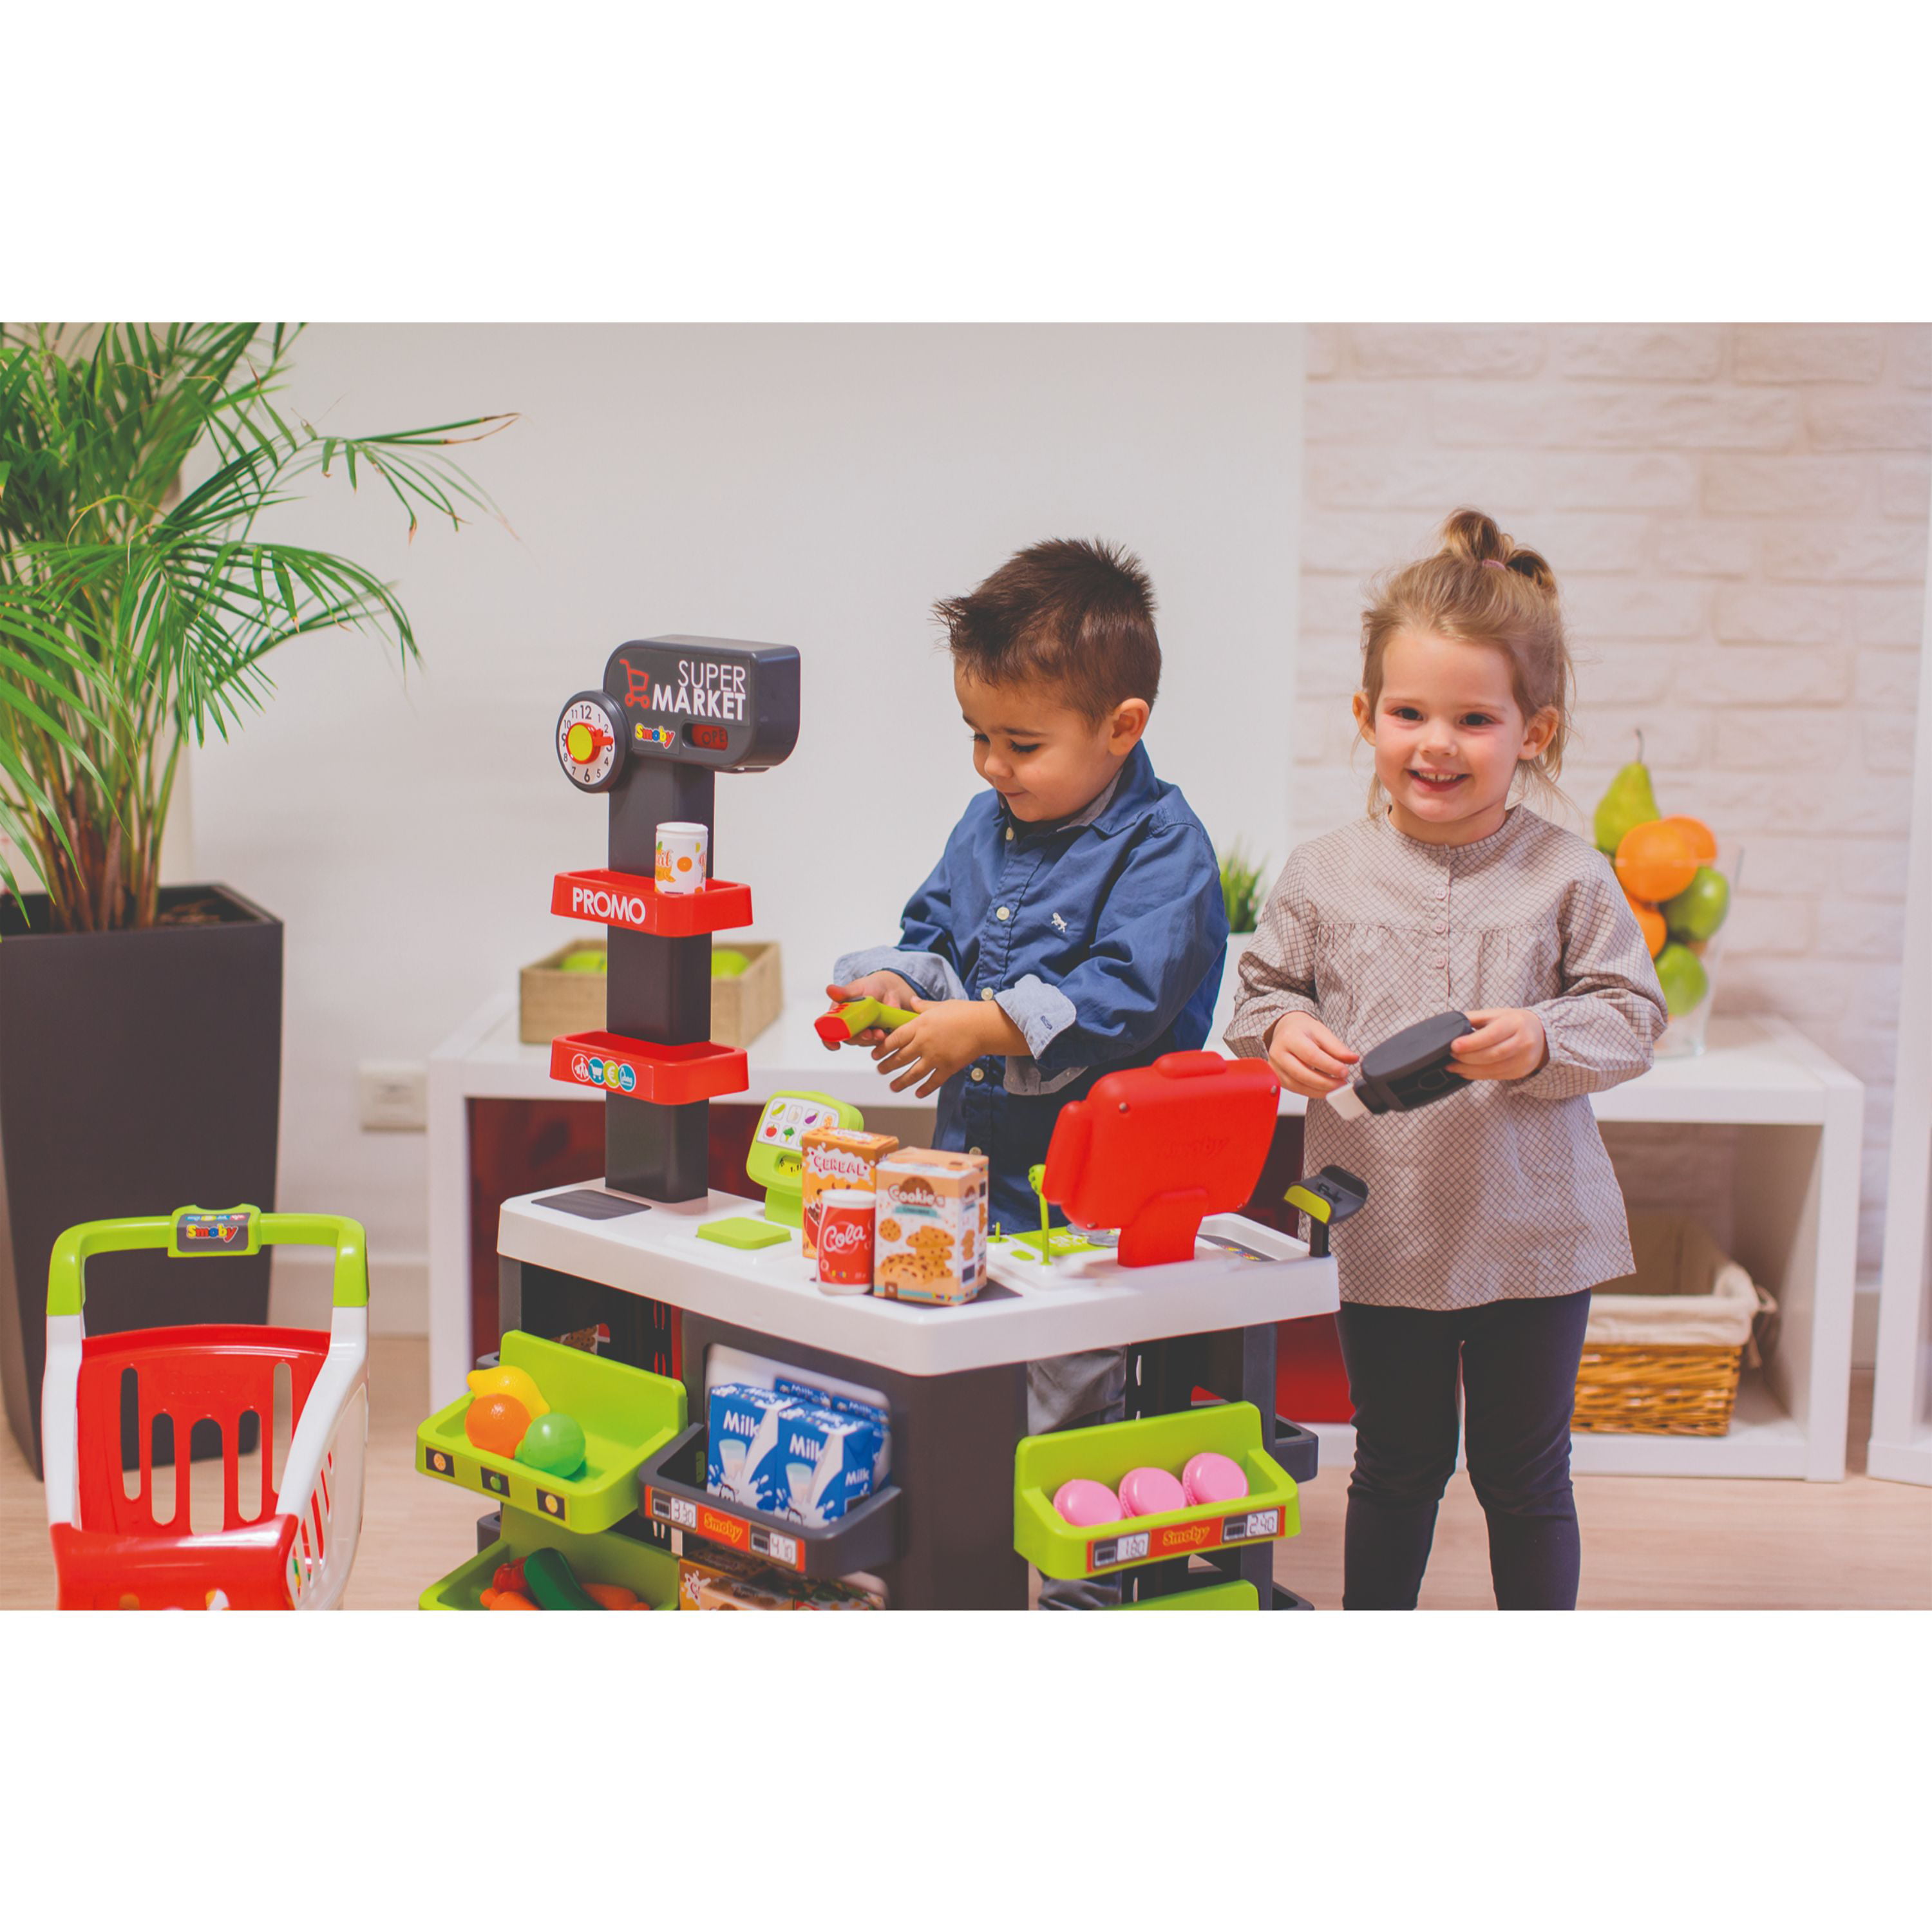 Buy Little Smoby toys online